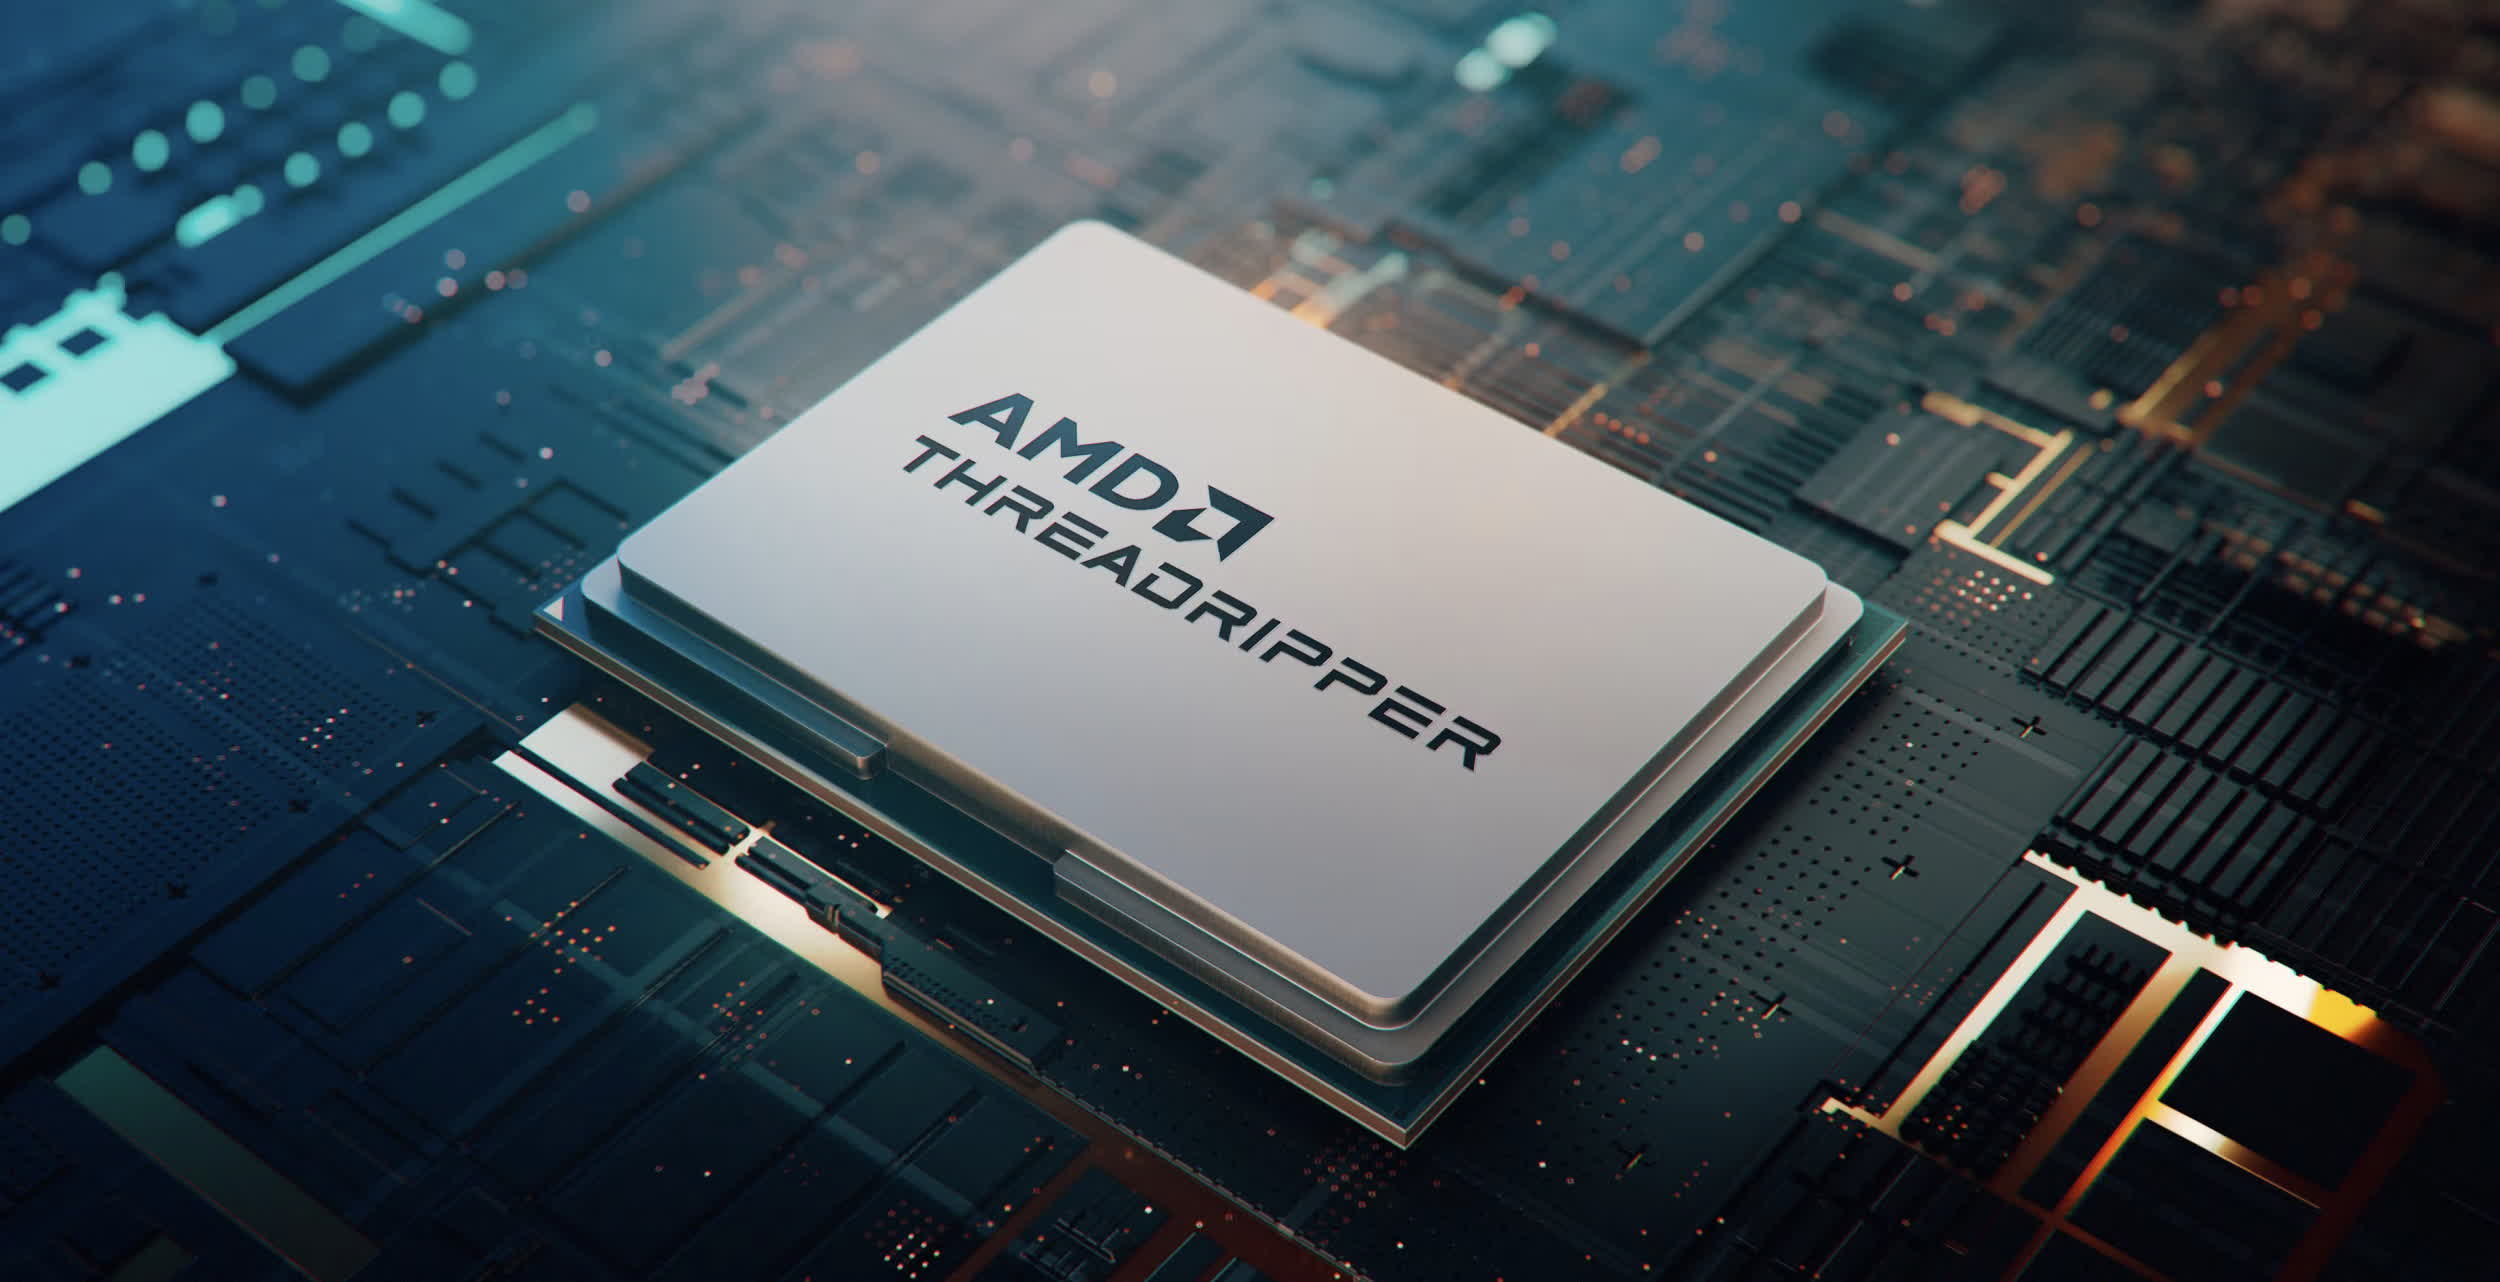 AMD stock reaches almost unprecedented value thanks to AI chip demand